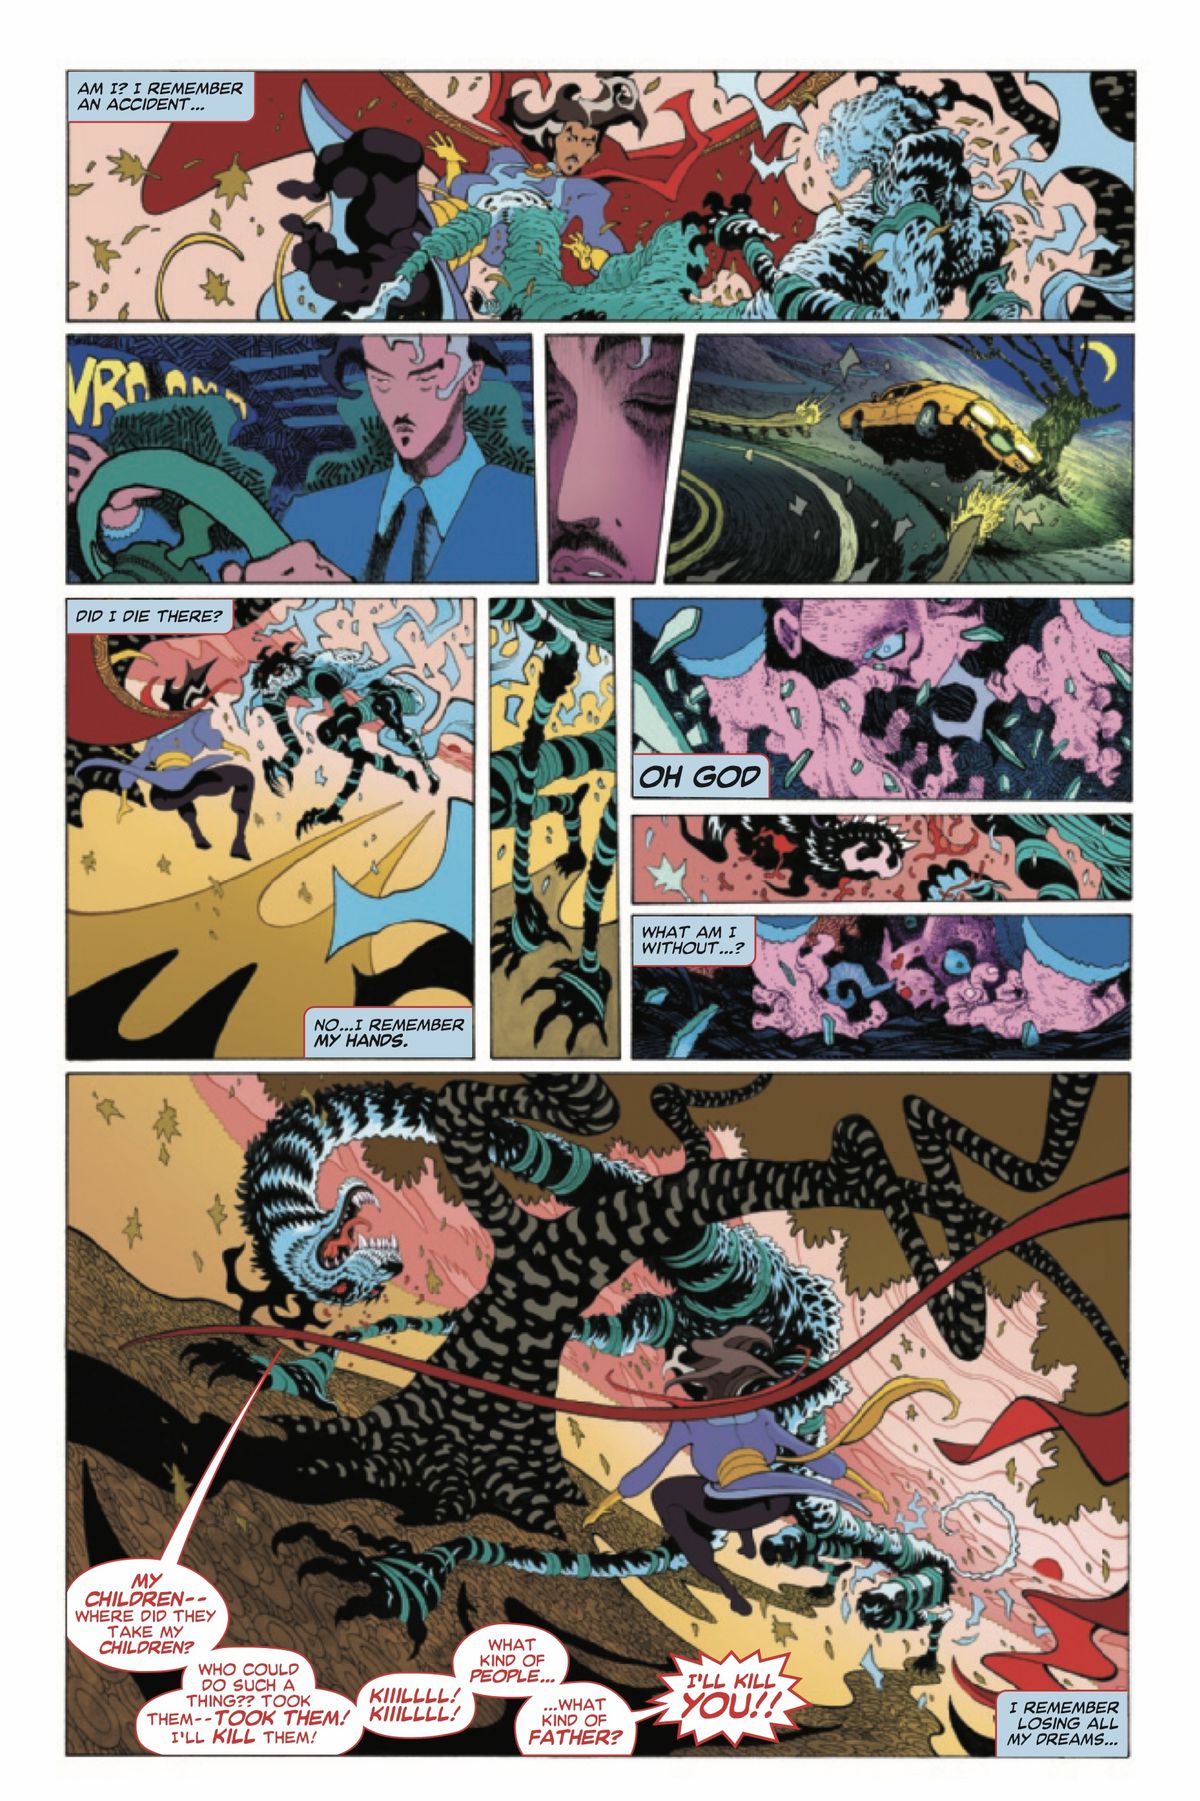 A page from Doctor Strange #1 (Marvel Comics, 2022) where dreamlike scenes from Doctor Strange’s origin story are intercut with a scene in the present where Doctor Strange fights a ghost tiger.